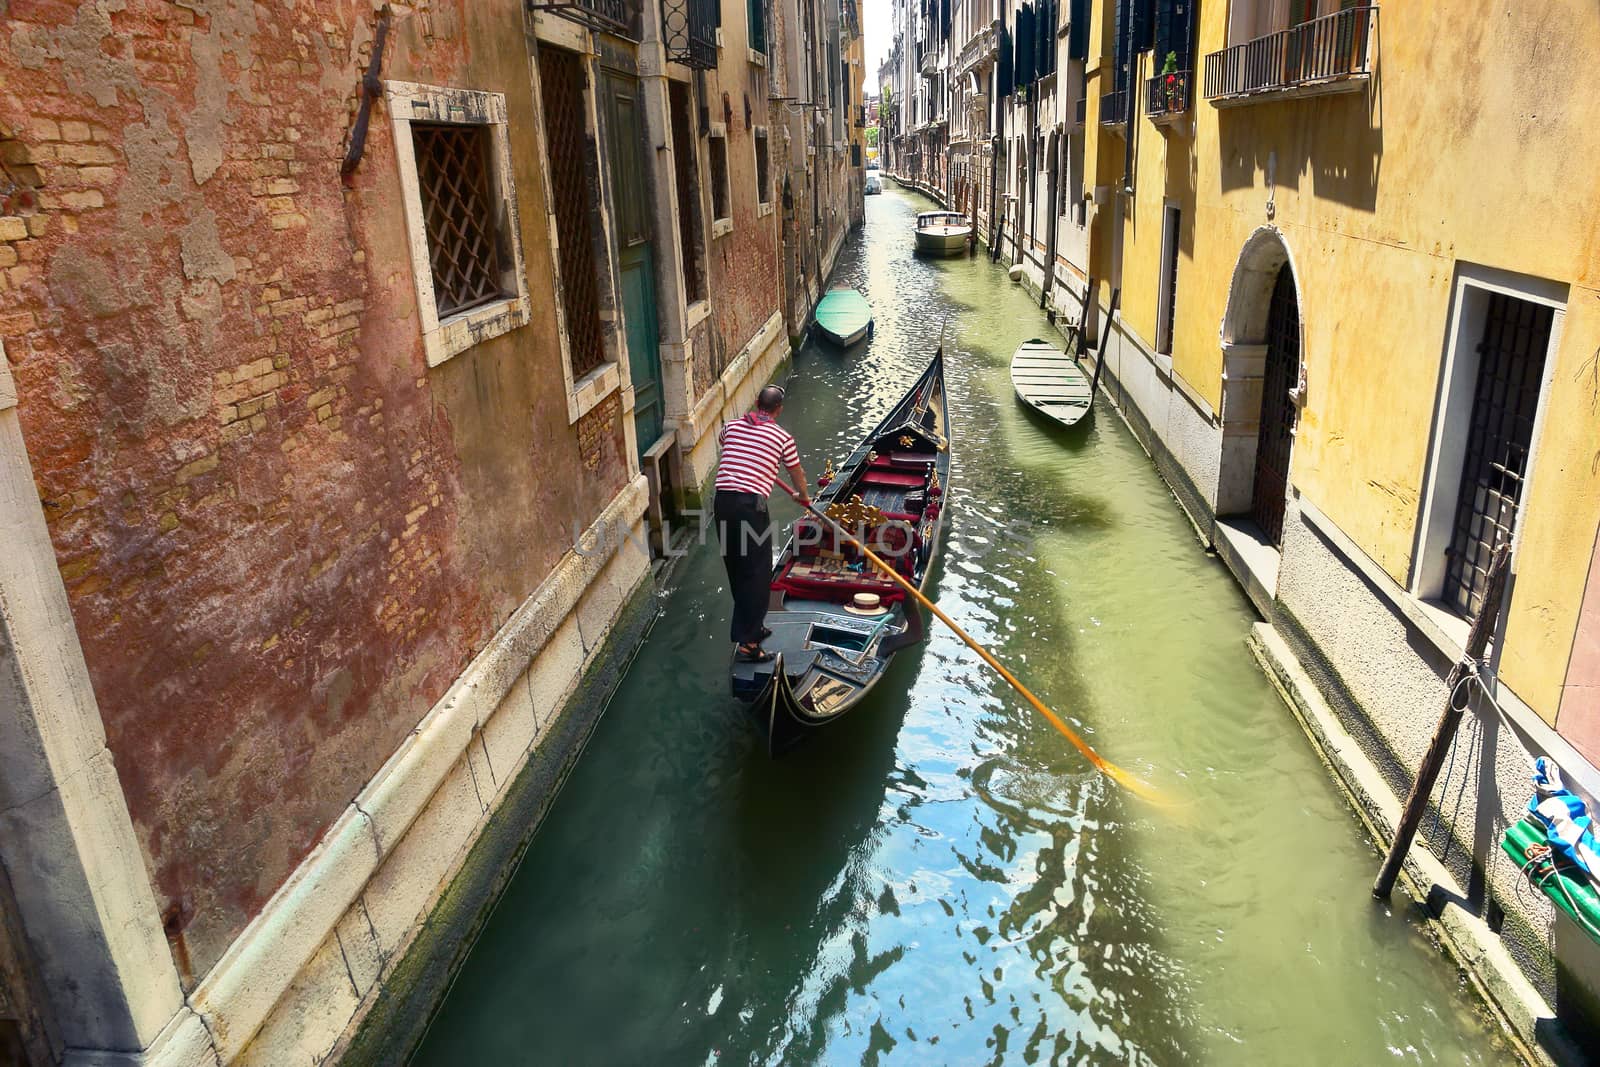 gondolier on the way to the grand canal, venice, italy